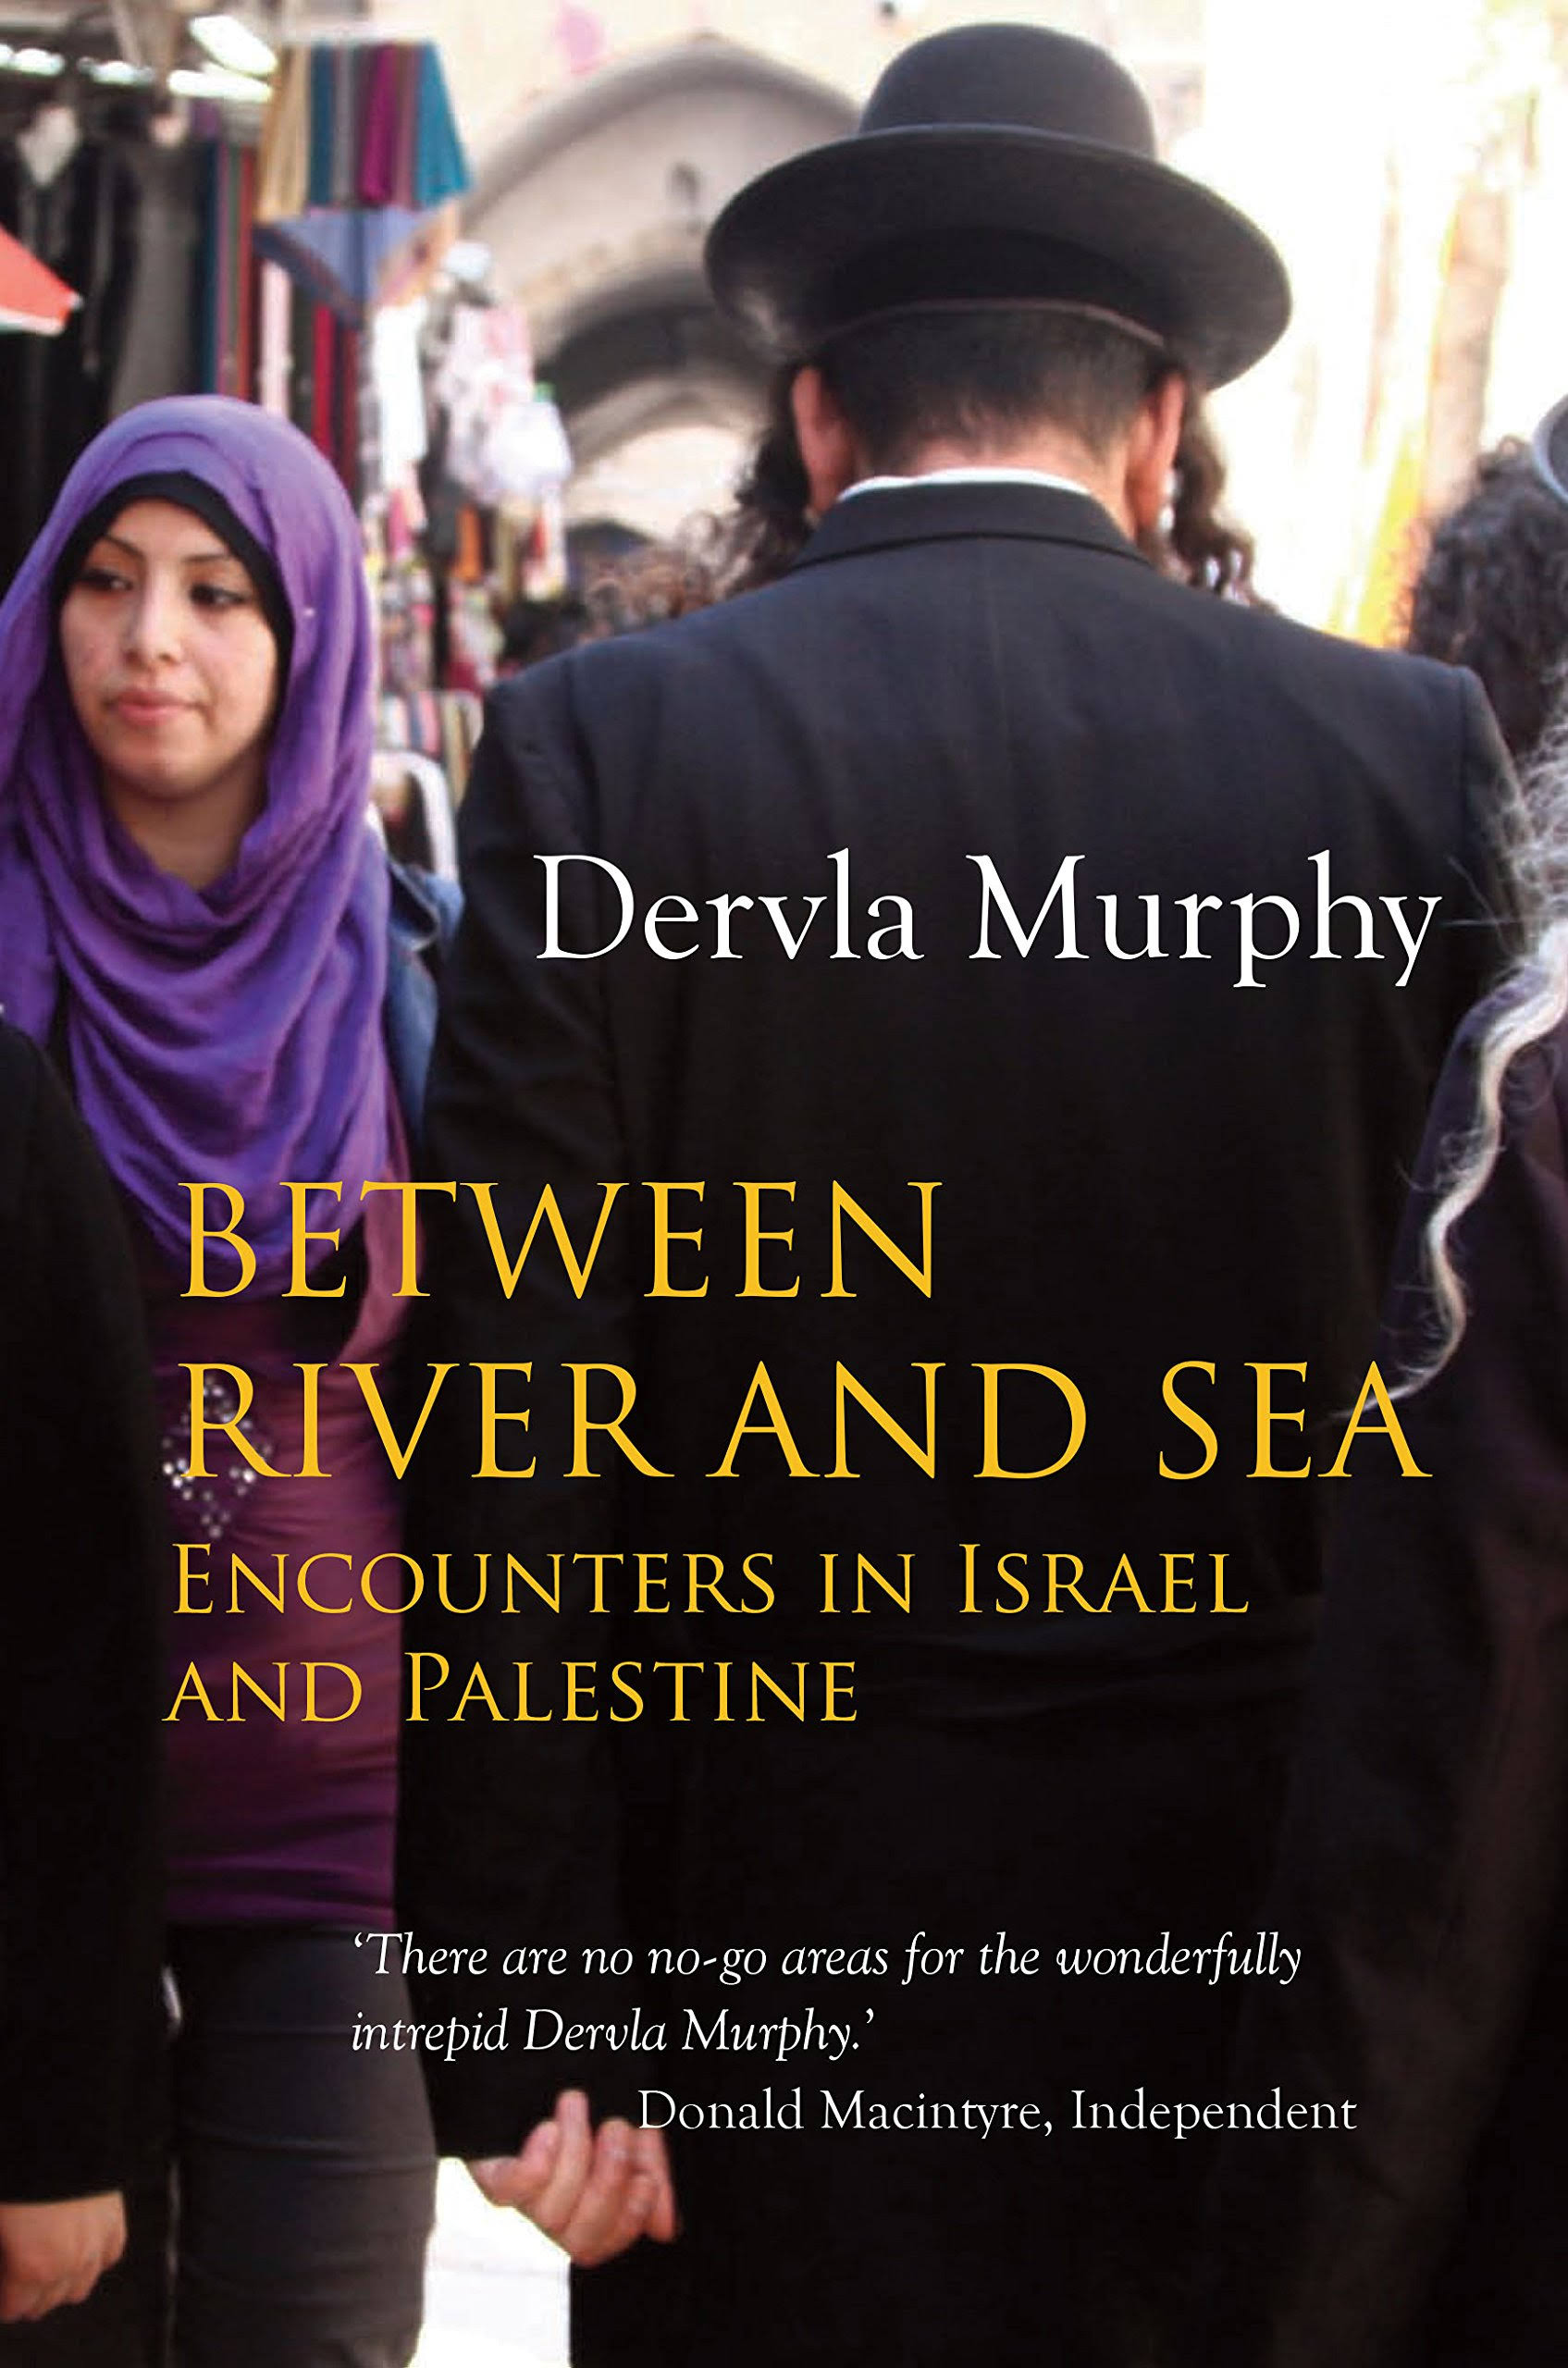 Between River and Sea by Dervla Murphy